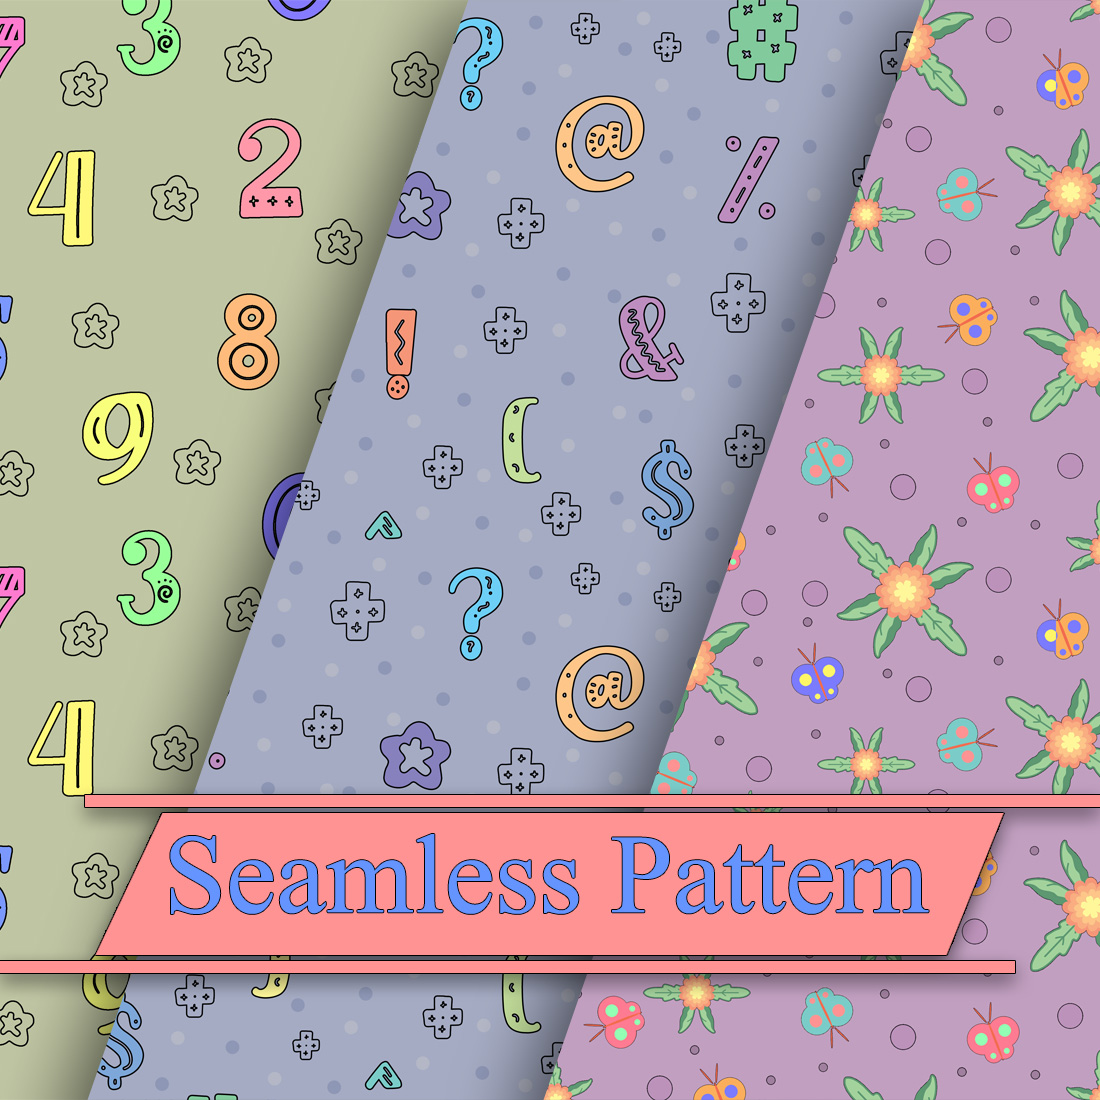 Seamless Patterns cover image.